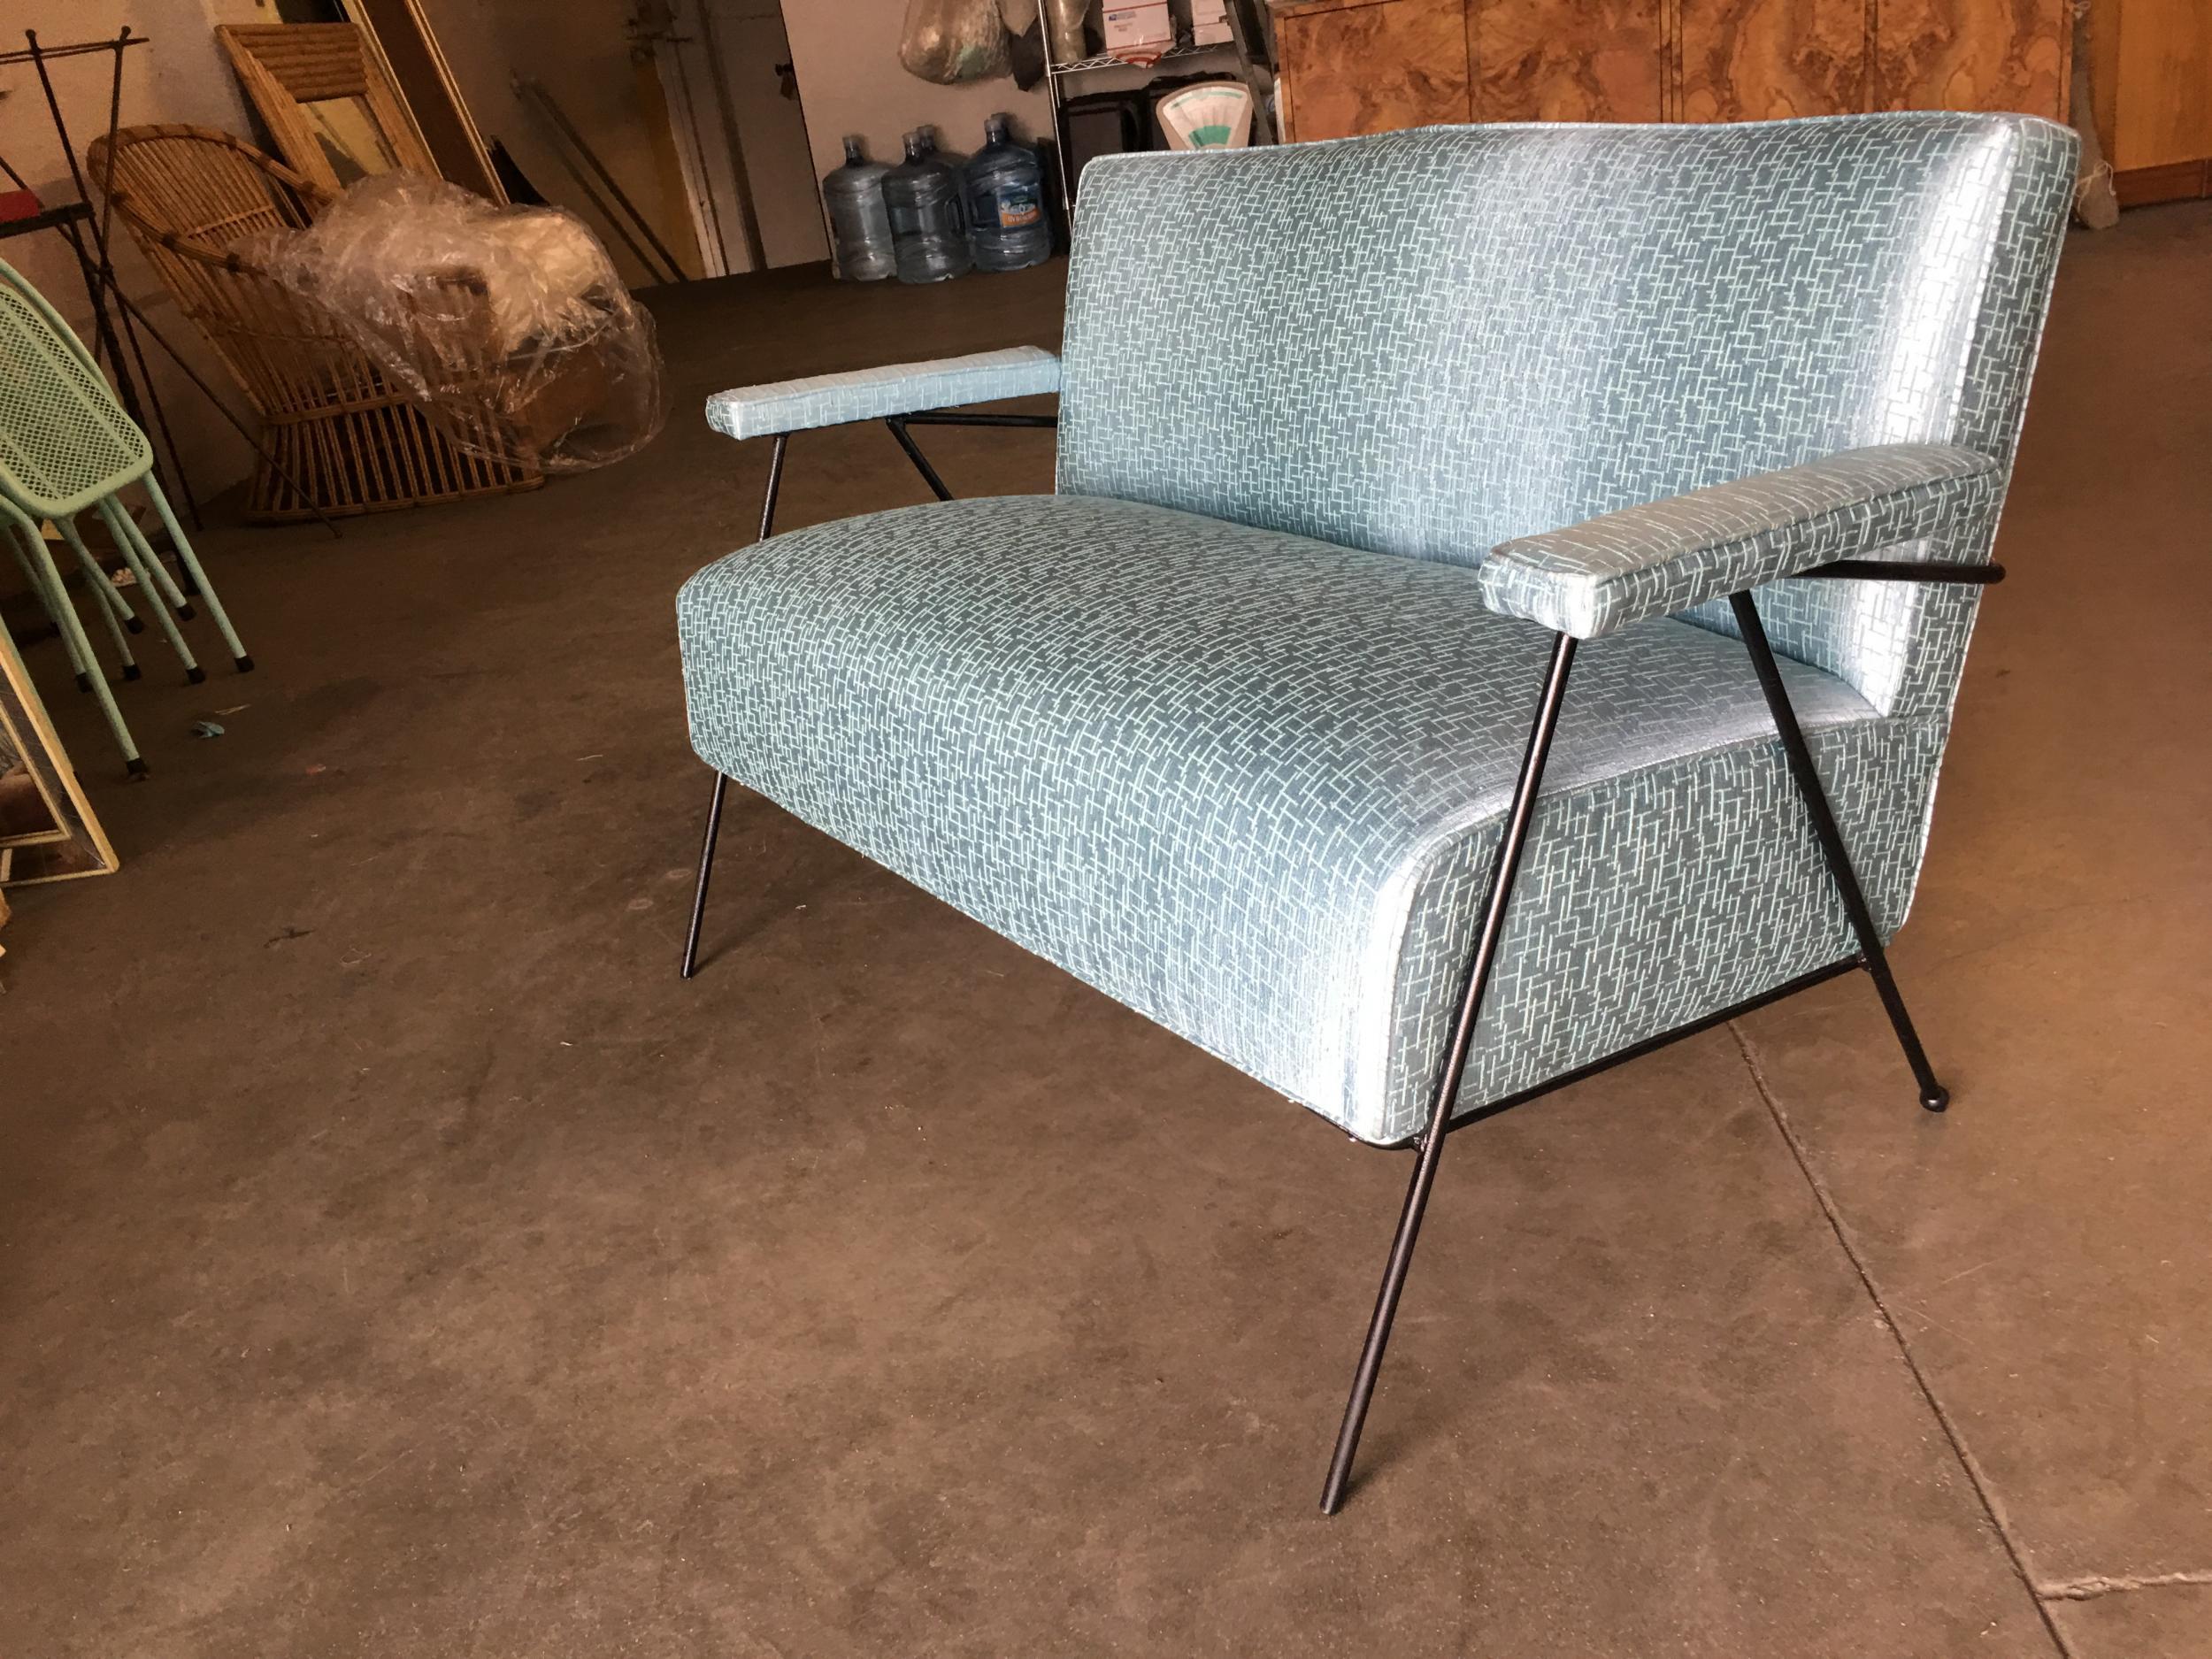 All original Atomic Age loveseat sofa featuring blue/green lined fabric seat with wrought iron legs with built-in armrest.